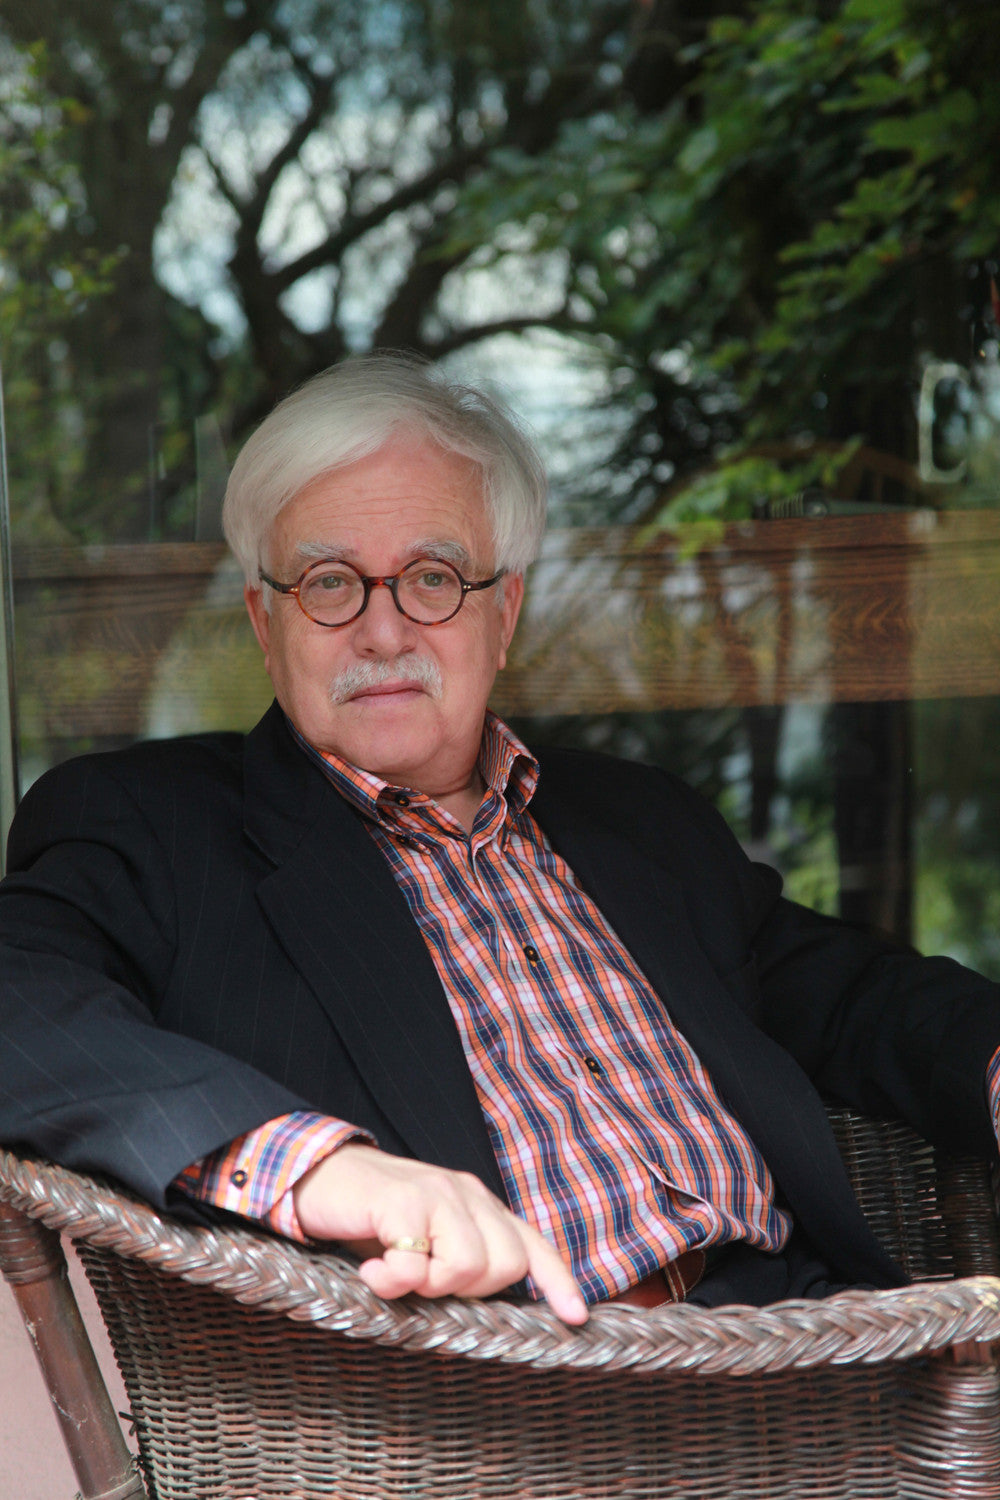 We Need A 'Renaissance of Wonder': Van Dyke Parks Makes Musical Connections